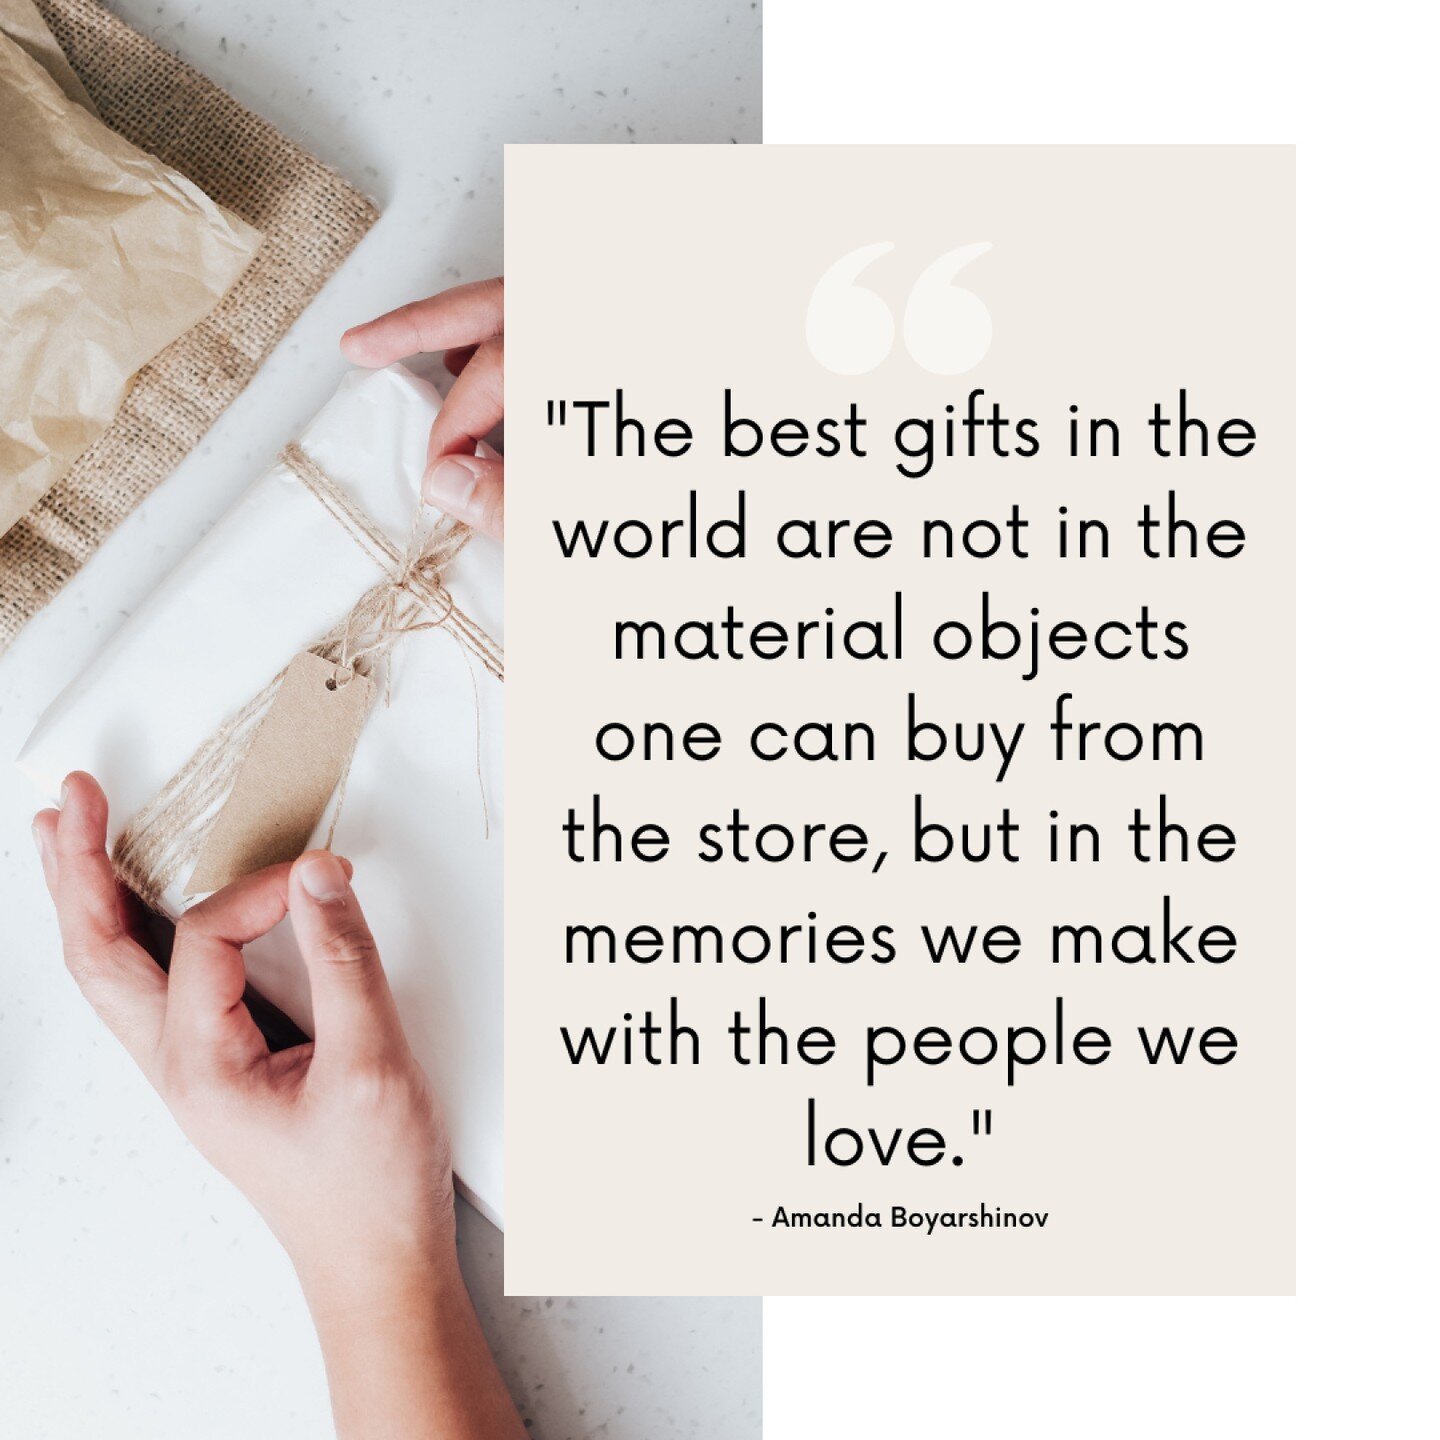 Cherish the moments, the laughter, and the joy shared with loved ones. 

🌟 Whether it's a cozy chat over hot cocoa or a spontaneous adventure, those memories are the real magic of the season. 💖

Let's focus on creating unforgettable moments and mak